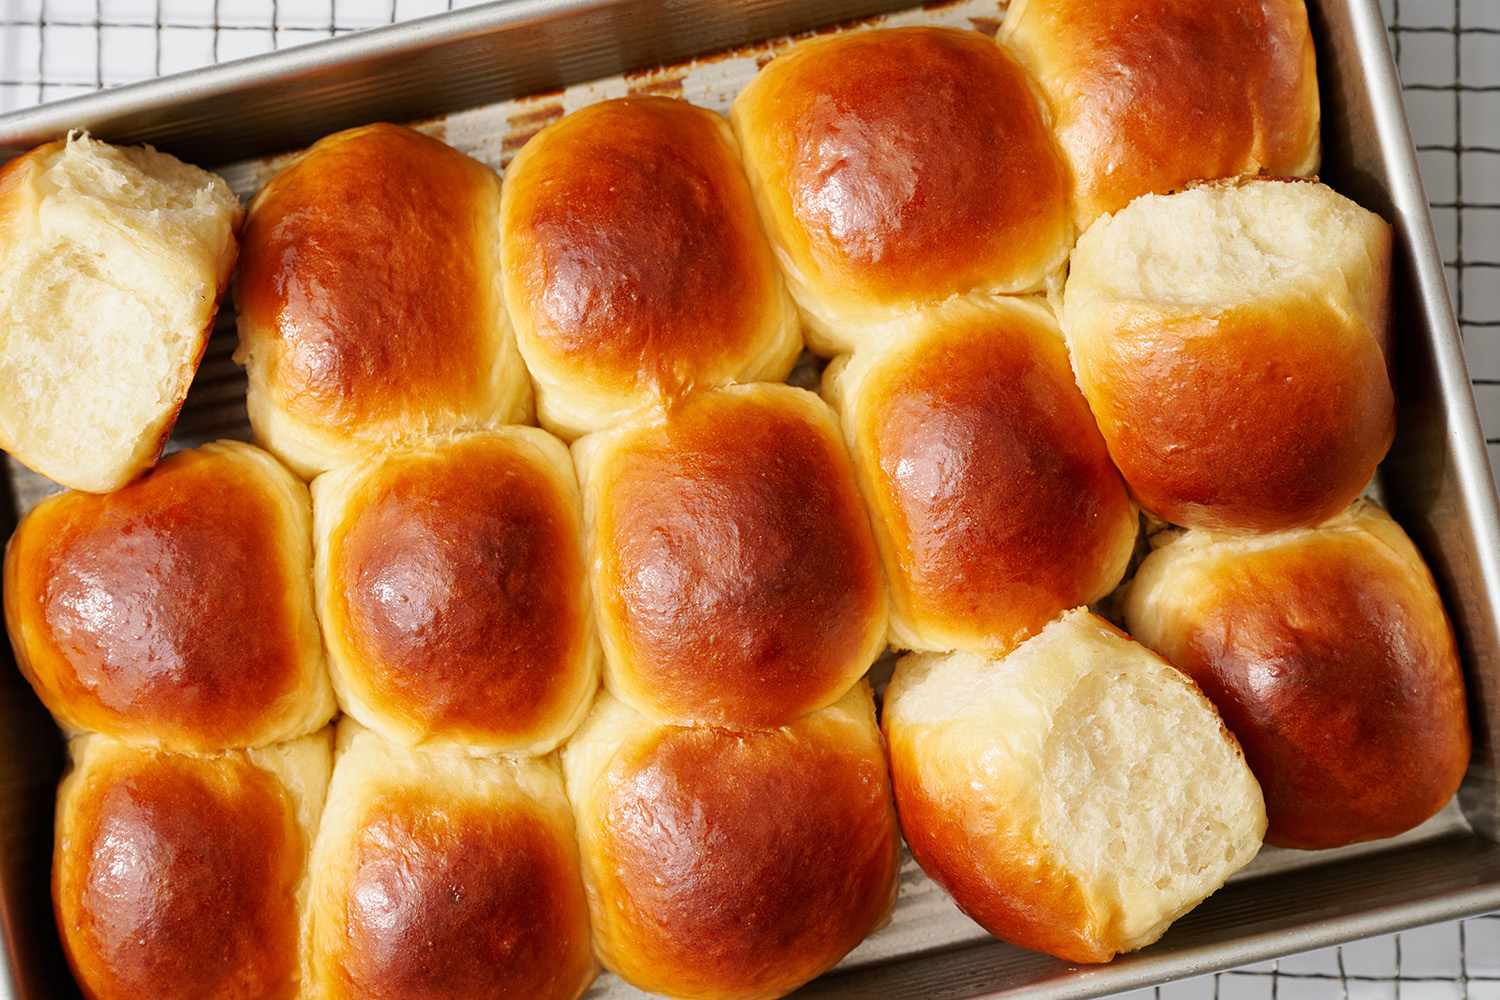 homemade hawaiian bread rolls with butter brushed on top, some still in the pan and a couple removed and turned on their side to show their fluffy texture.